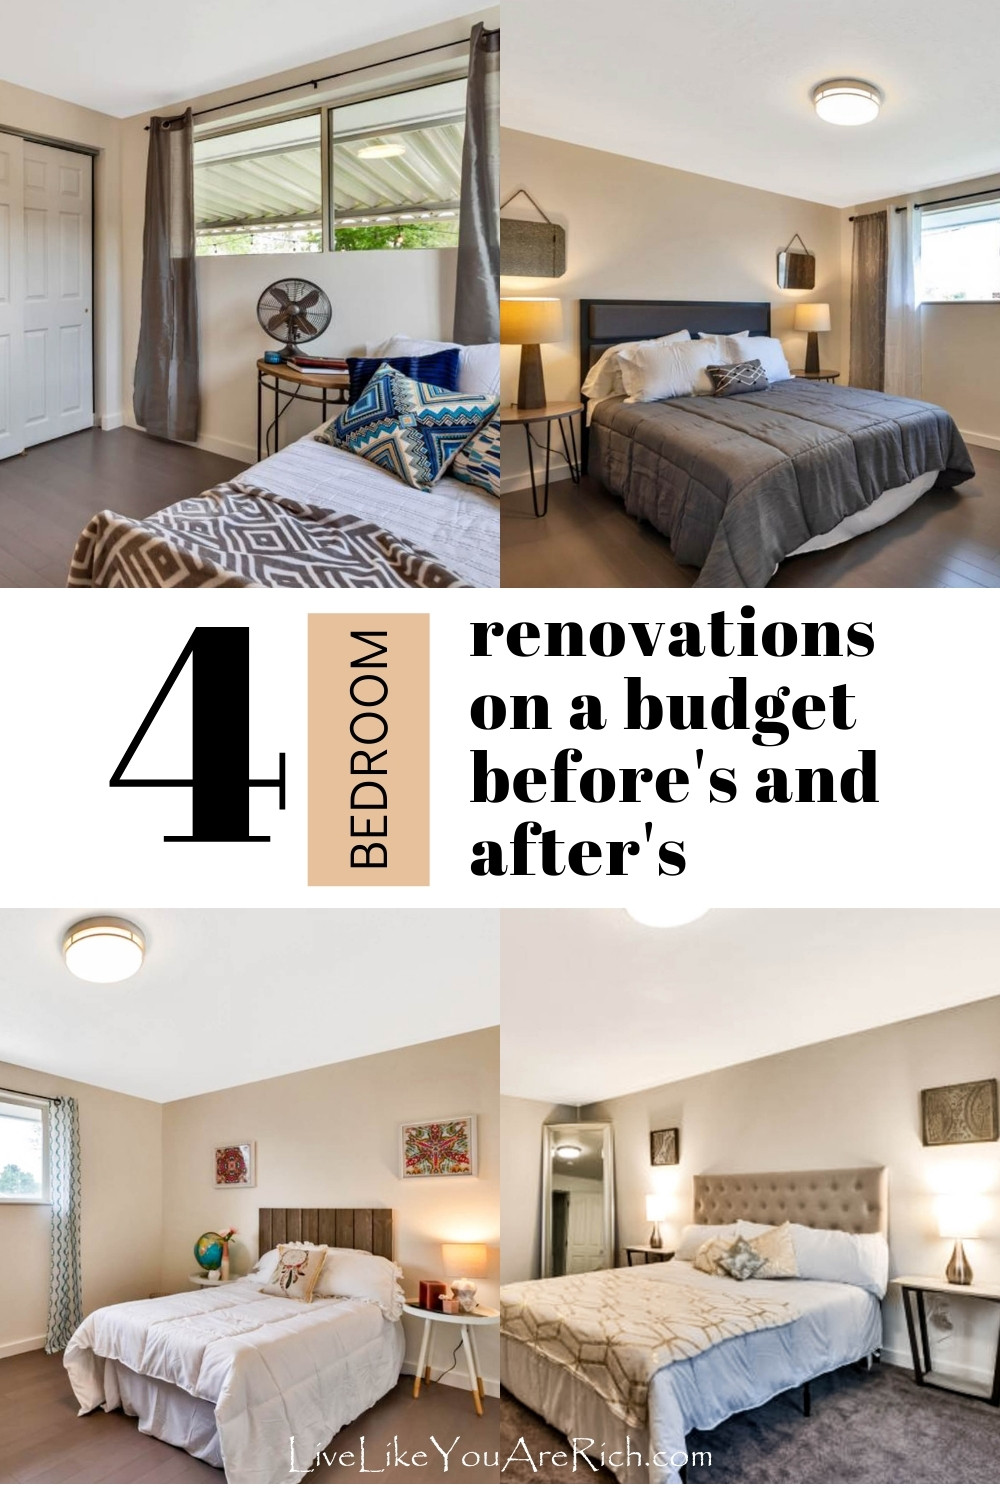 4 Bedroom Renovations on a Budget Before's and After's